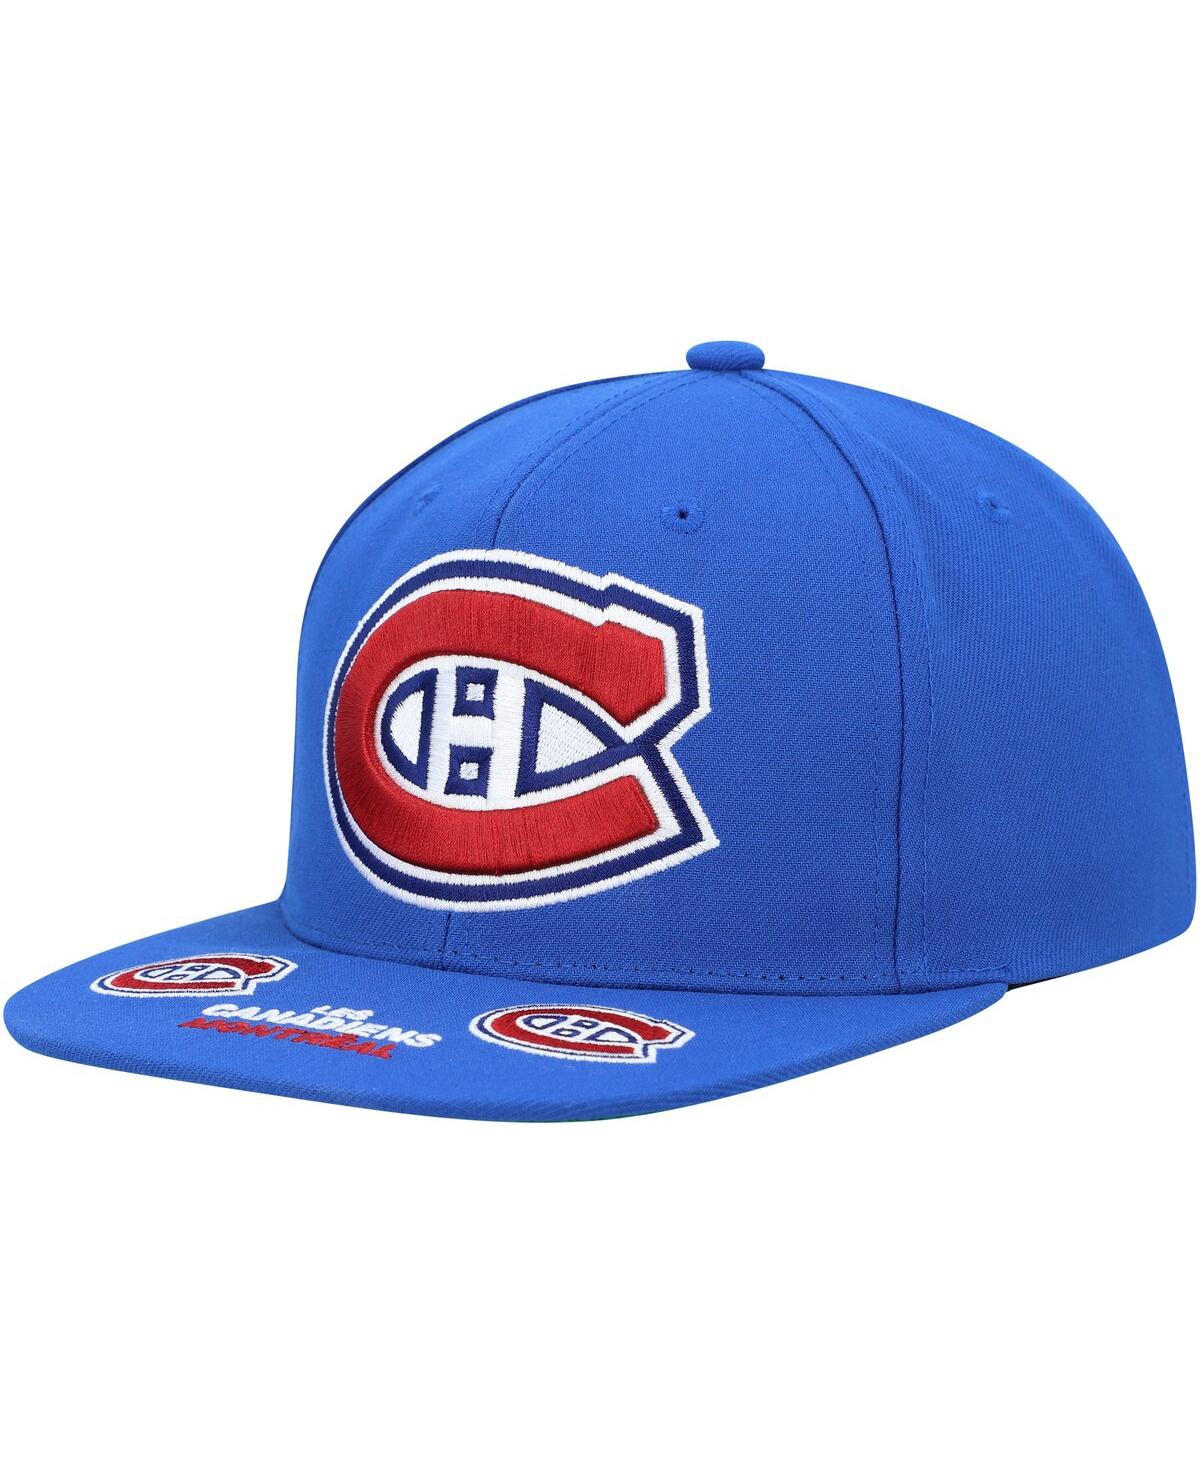 Shop Mitchell & Ness Men's  Blue Montreal Canadiens Vintage-like Hat Trick Snapback Hat